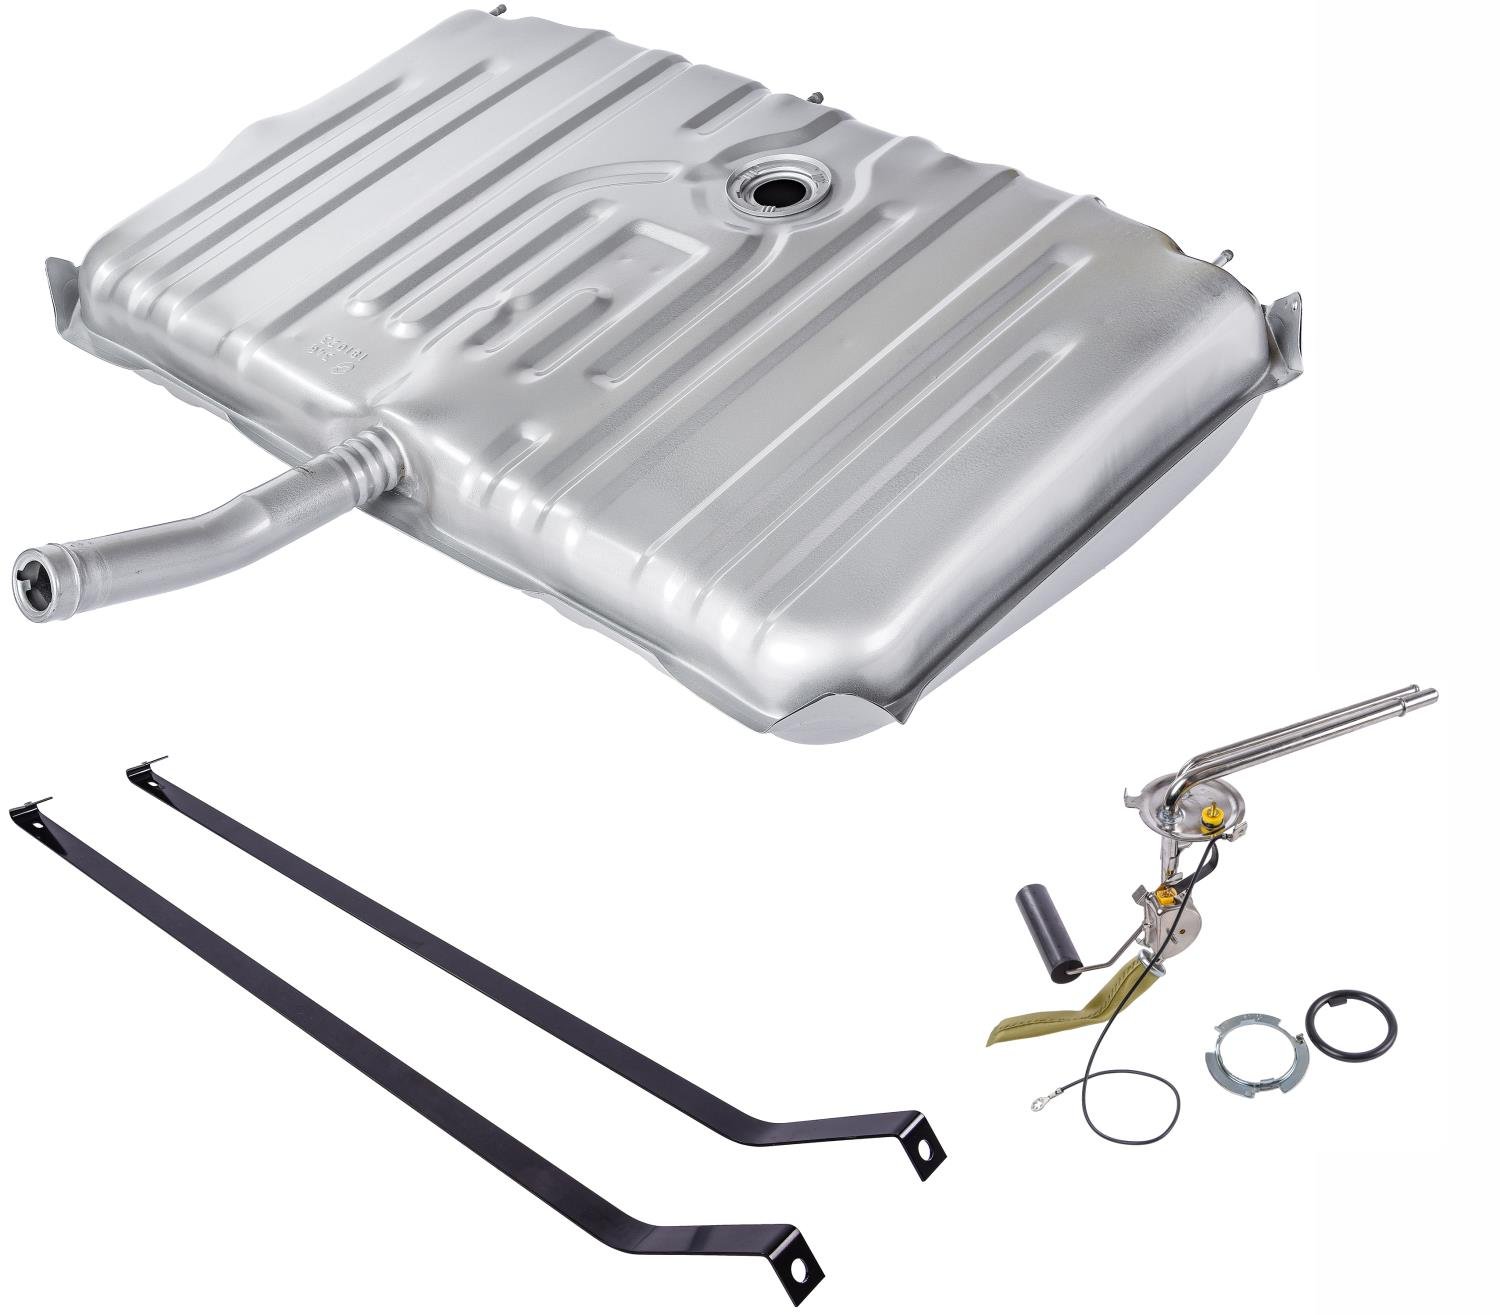 Fuel Tank Kit with Straps & Sending Unit for 1970 GM A-Body Cars [20-Gallon]